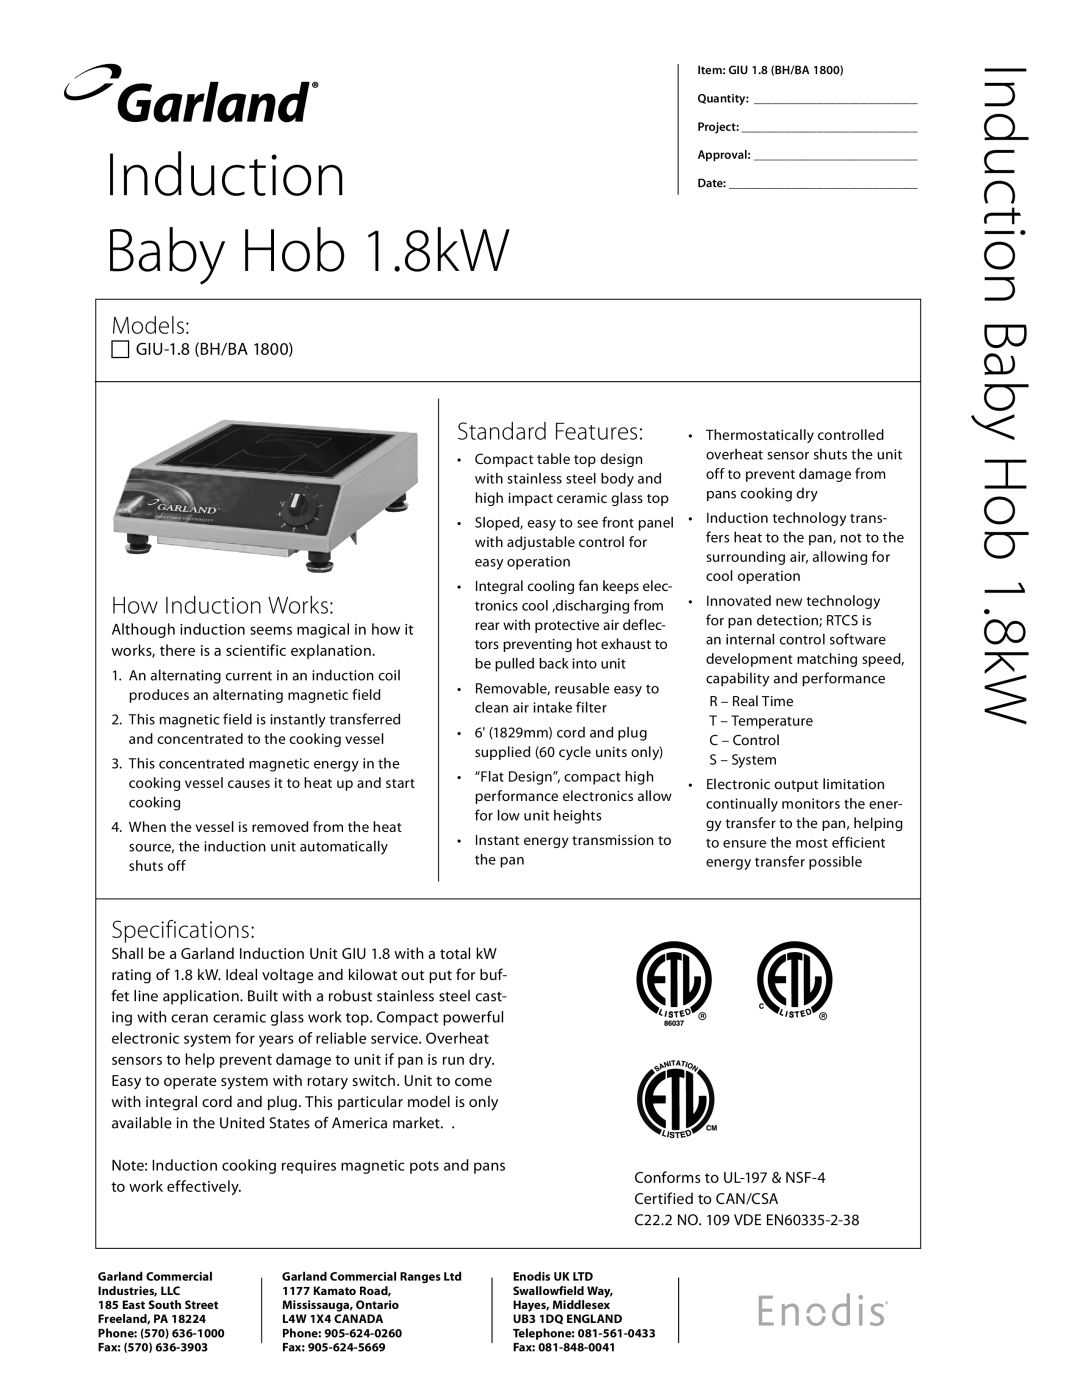 Garland GIU 1.8 specifications Baby Hob 1.8kW, Models, How Induction Works, Standard Features, Specifications 